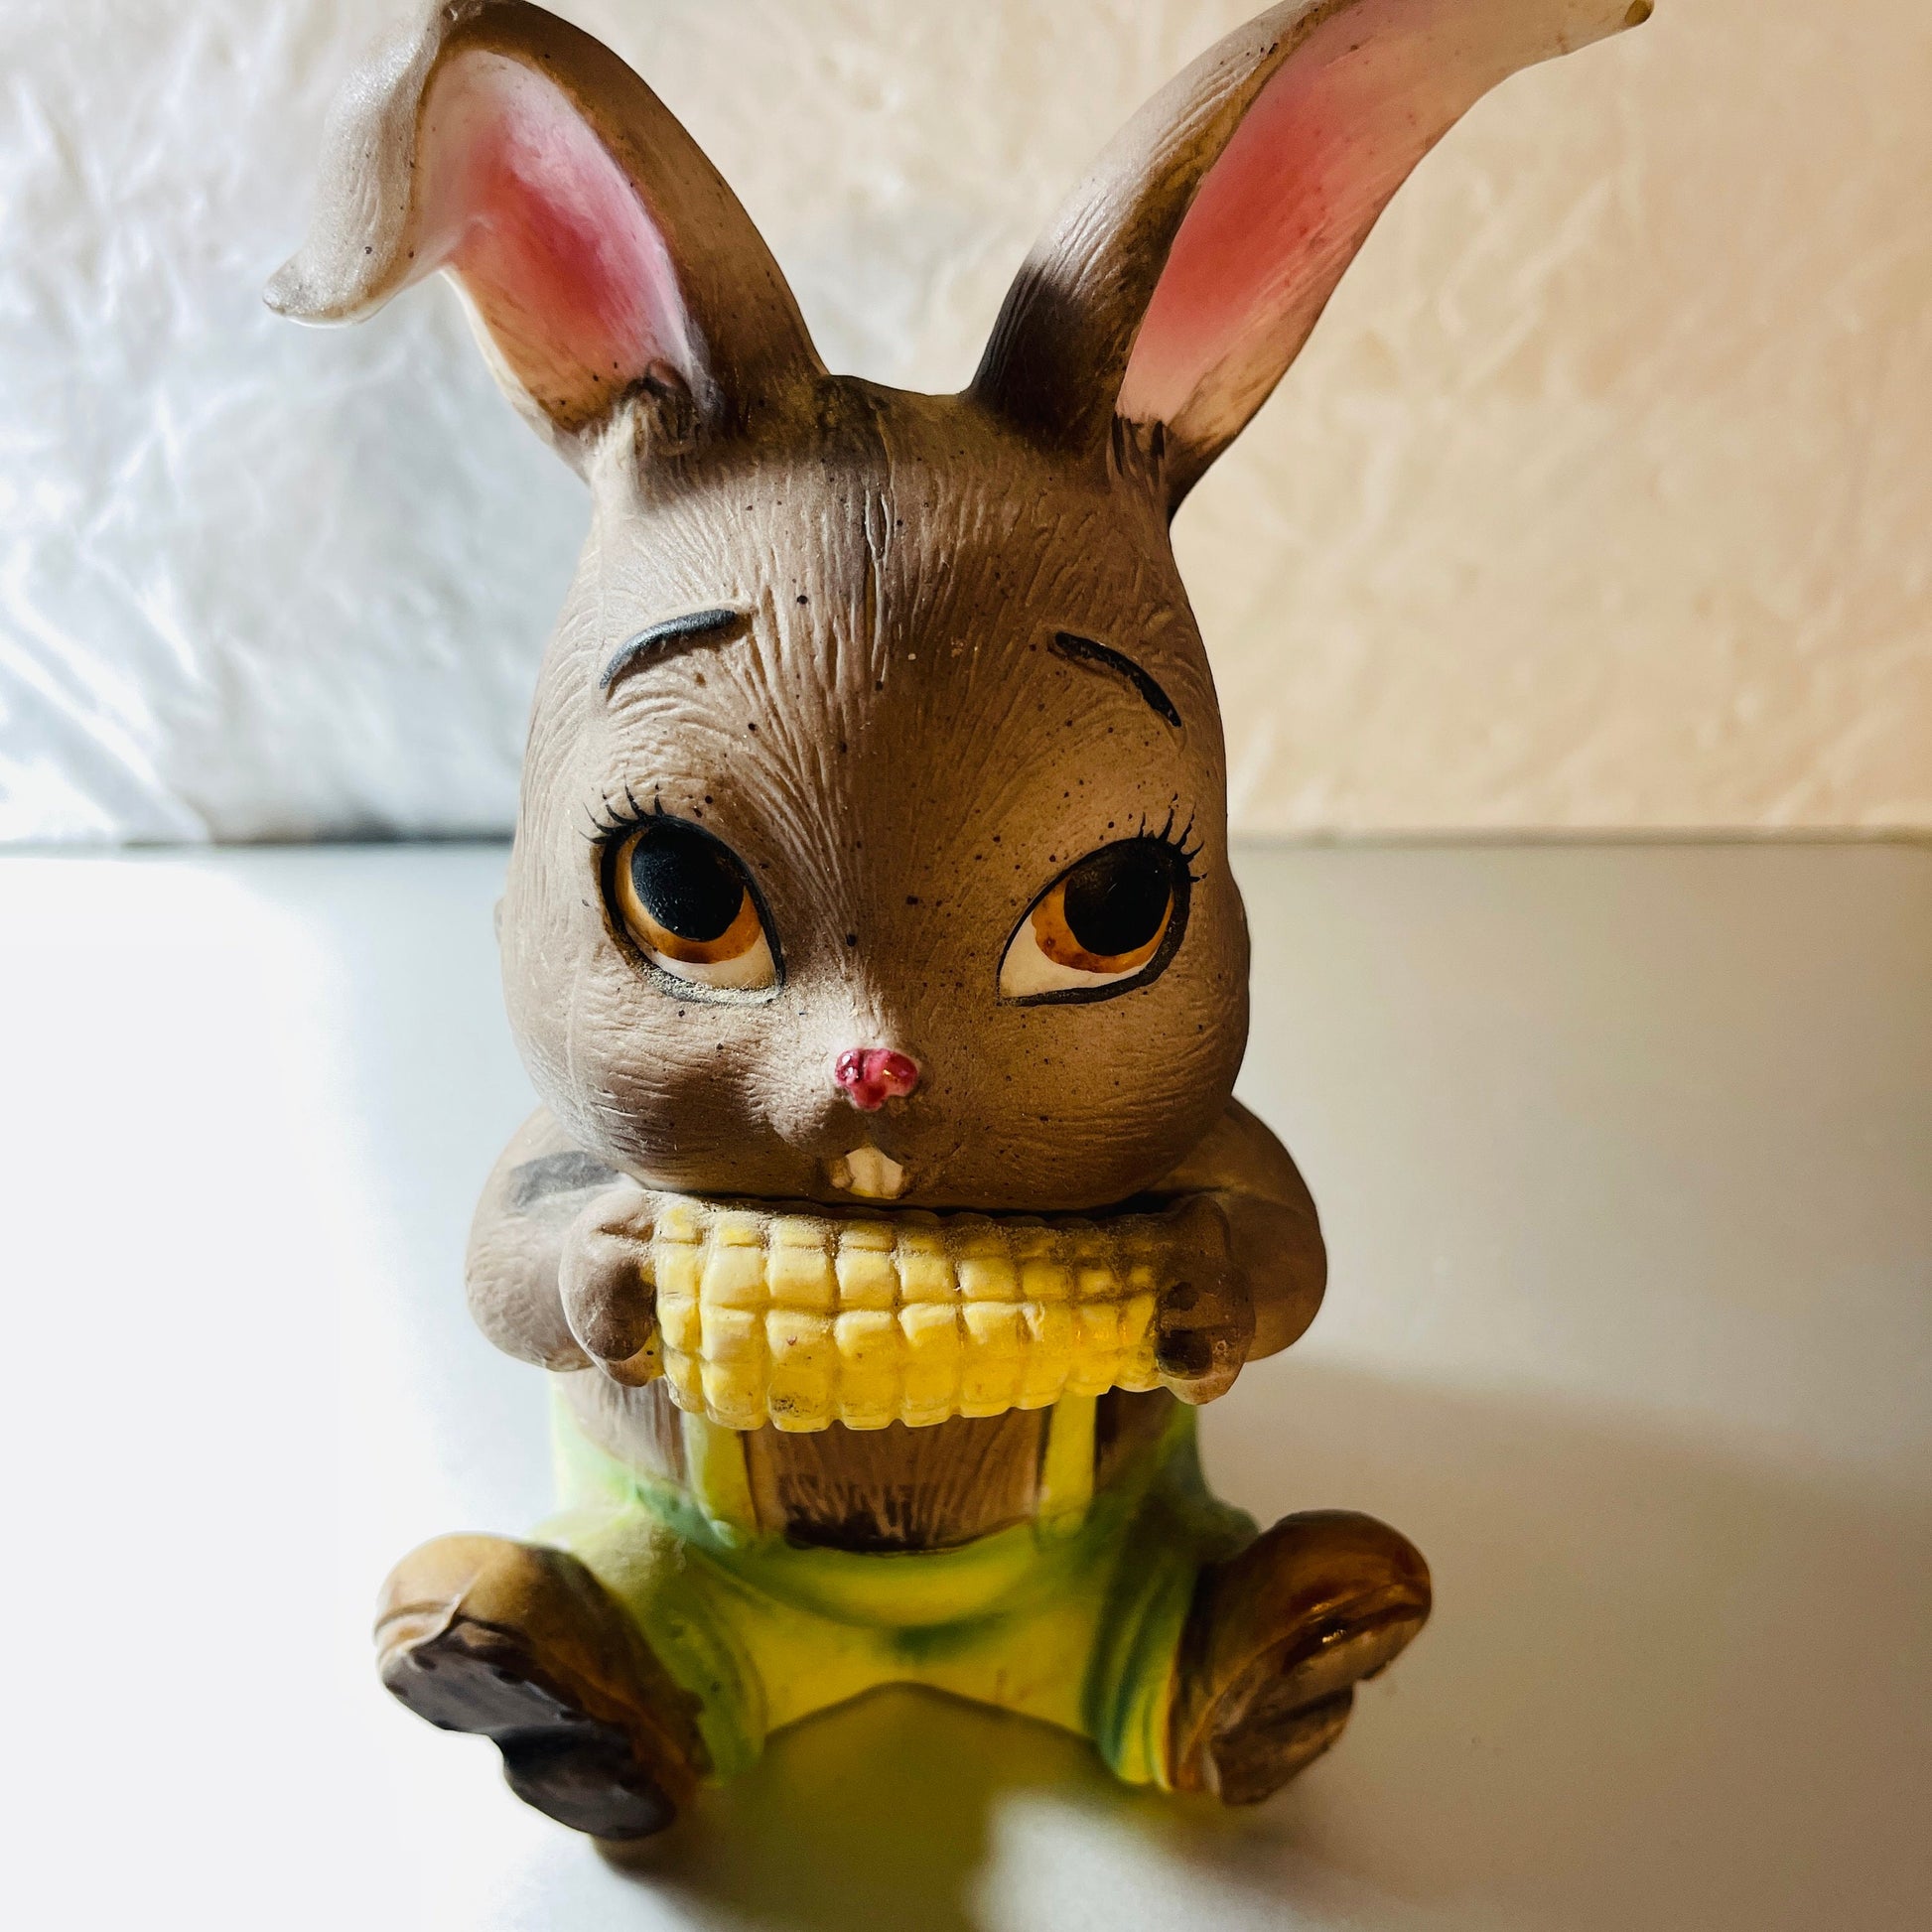 Bunny Rabbit Chewing Corn On the Cob, Vintage Collectible Bank Figurine